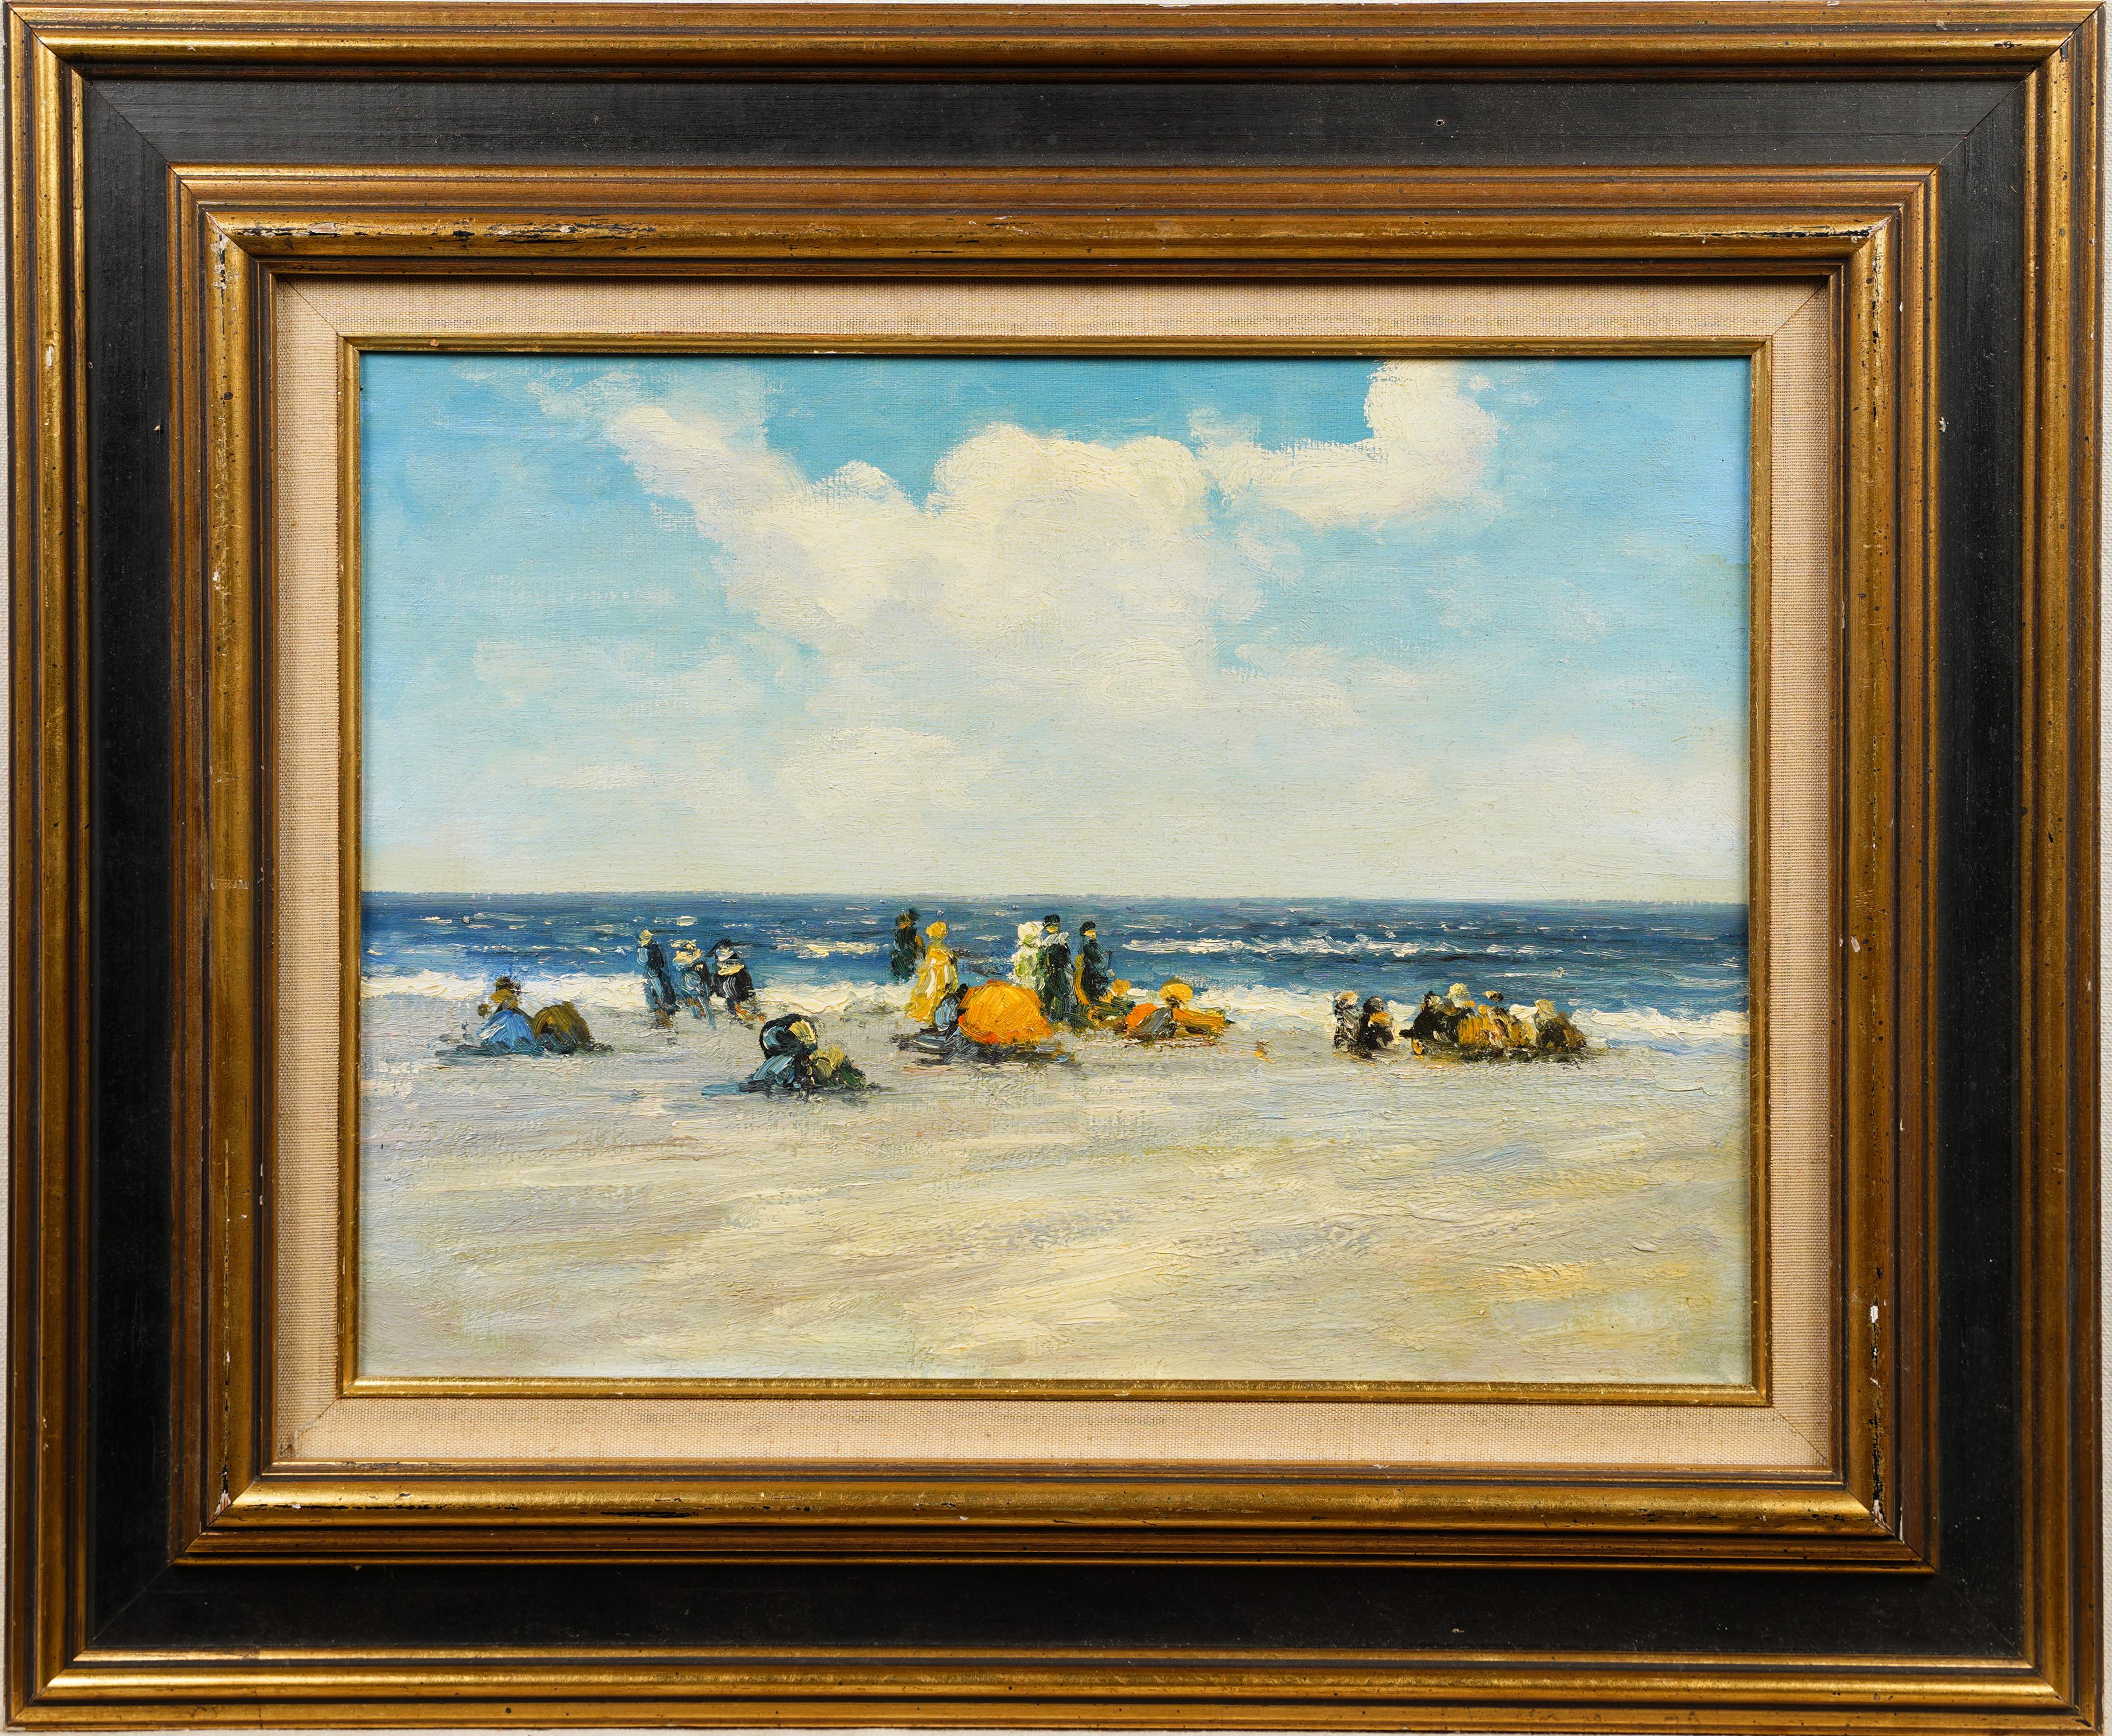 Antique American impressionist seascape beach scene oil painting.  Oil on board.  No signature found.  Framed.  Image size, 18L x 14H.